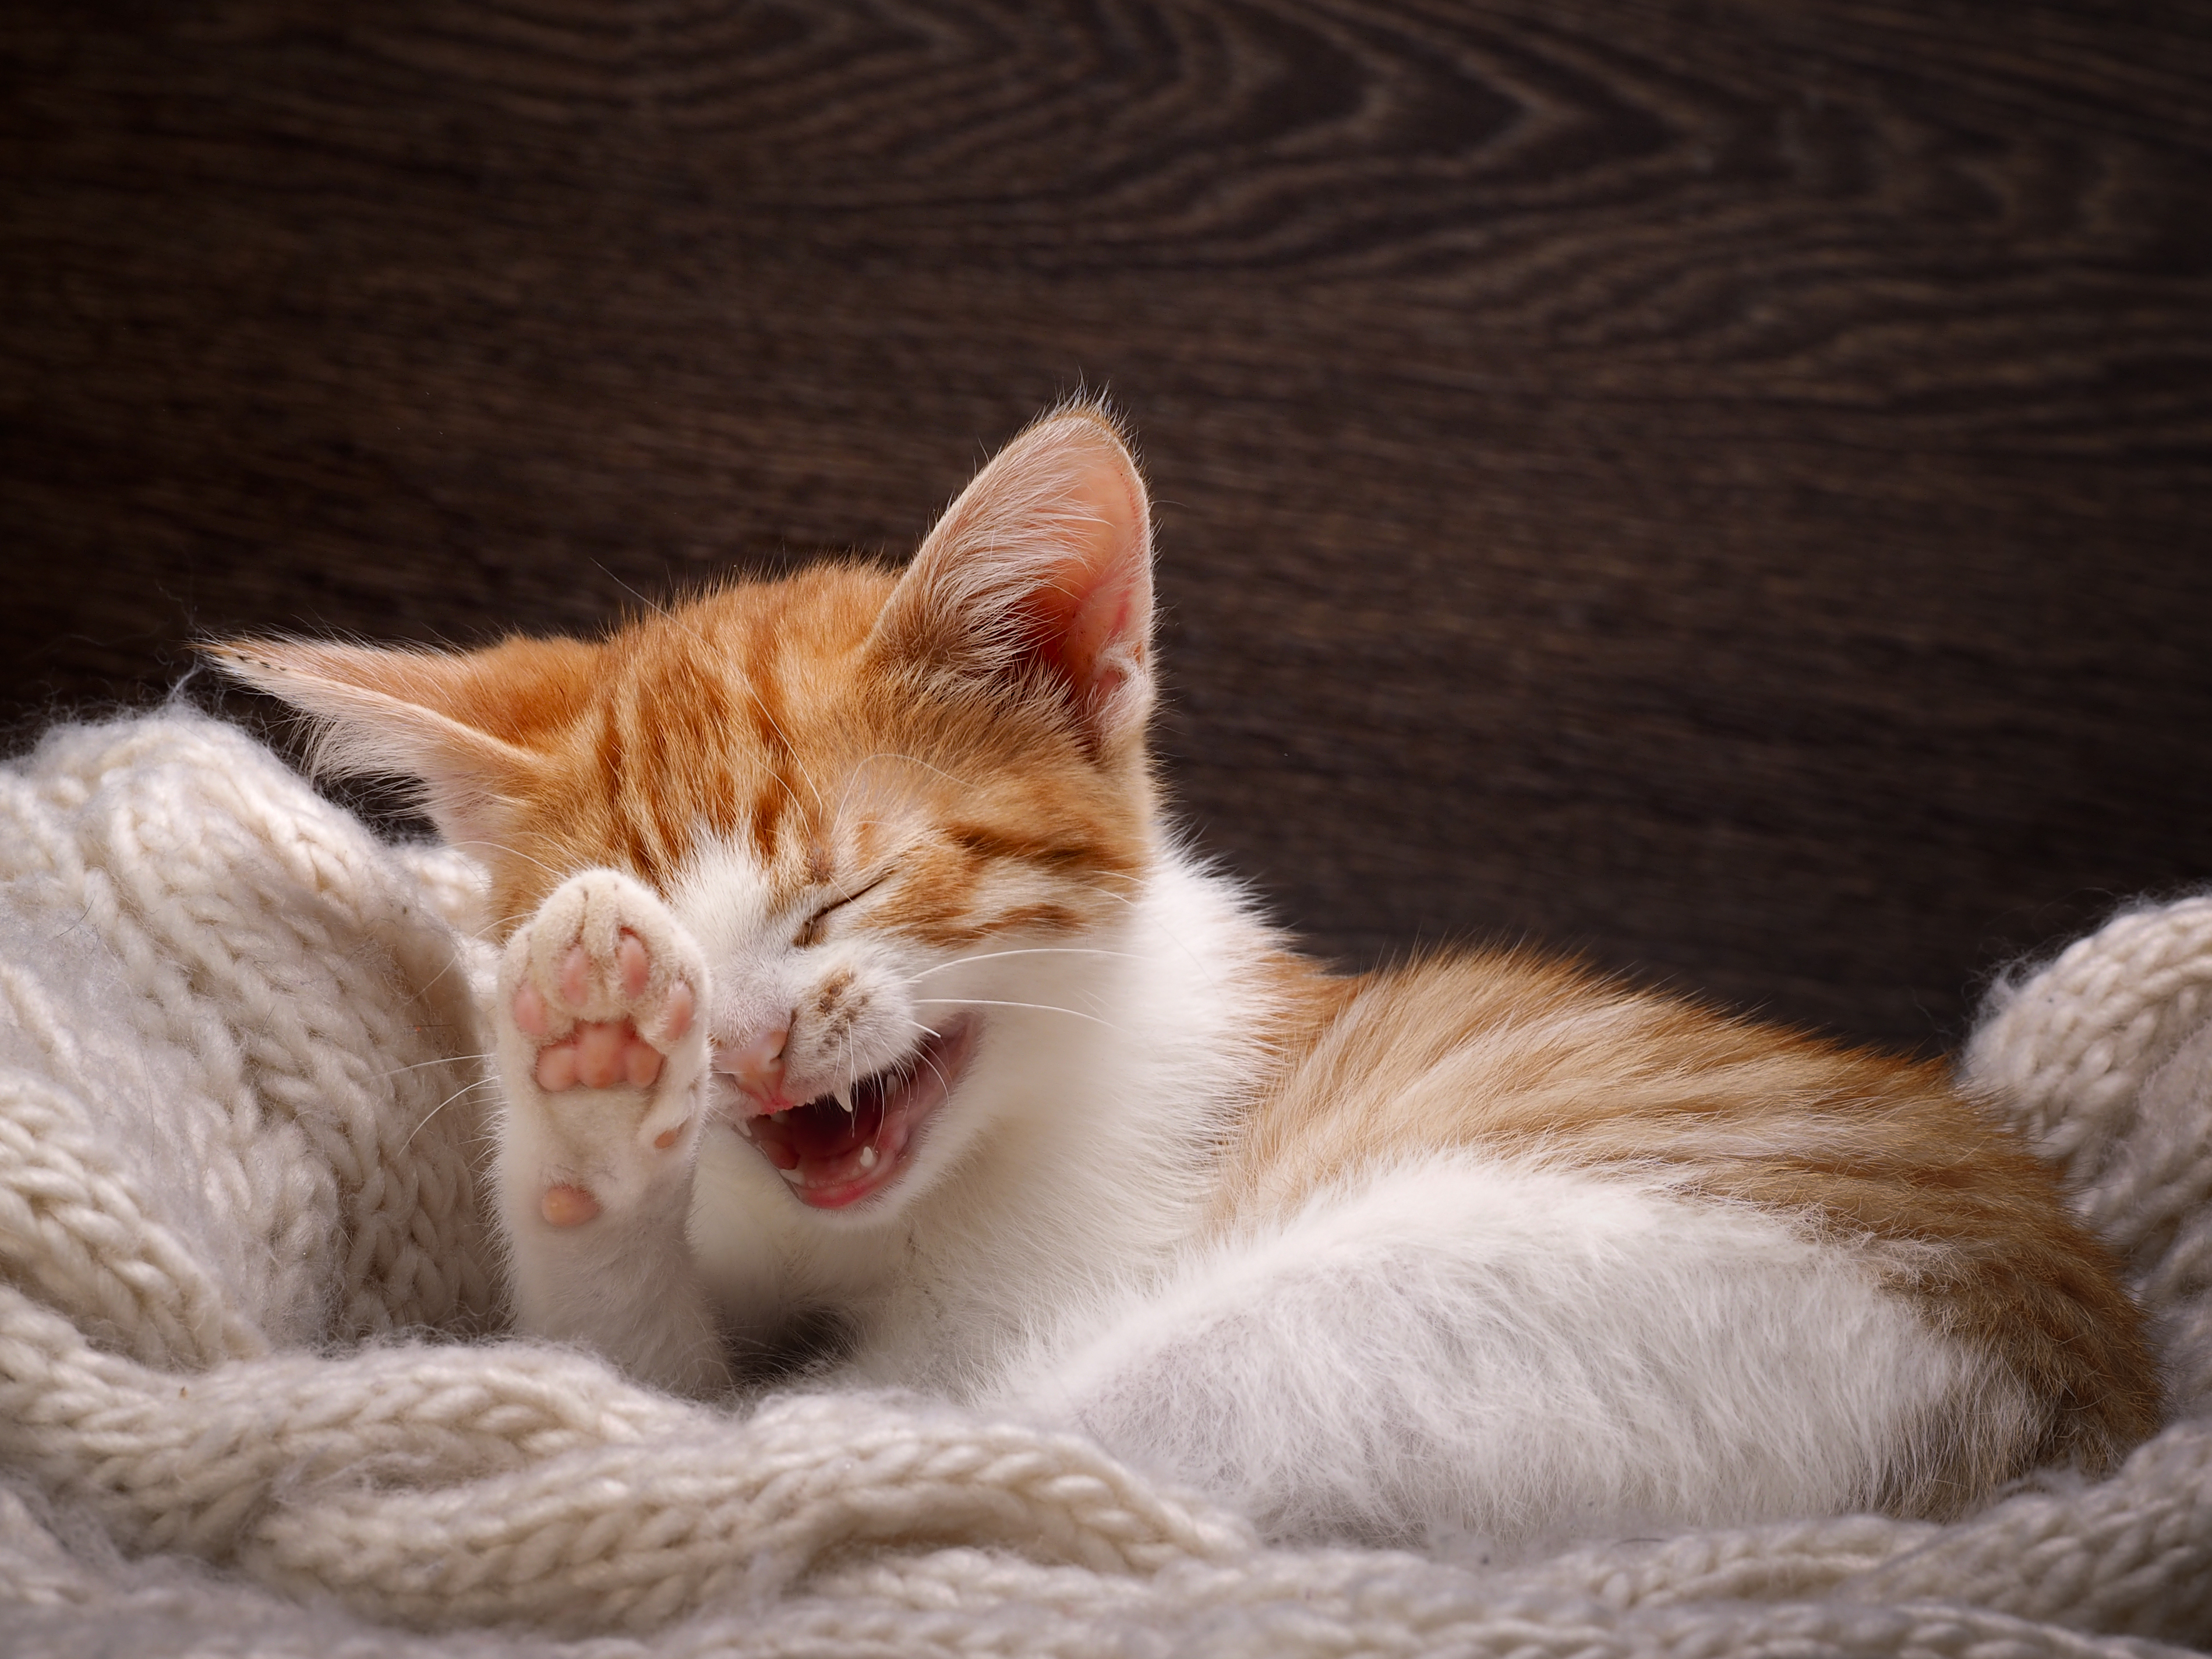 Kitten yawning while curled up in a cozy knit blanket